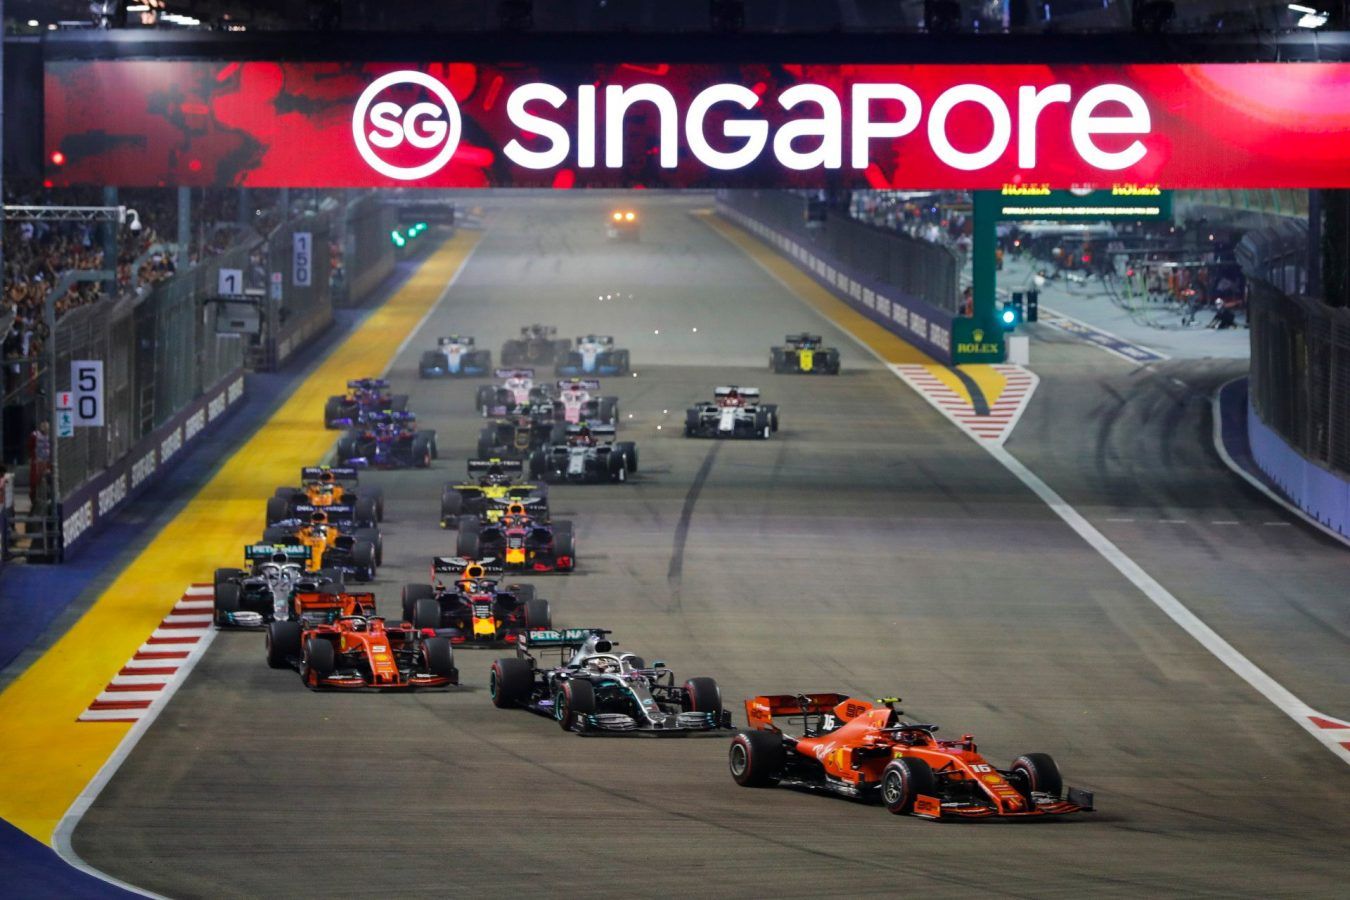 Key racing events during the 2022 Formula 1 Singapore Grand Prix